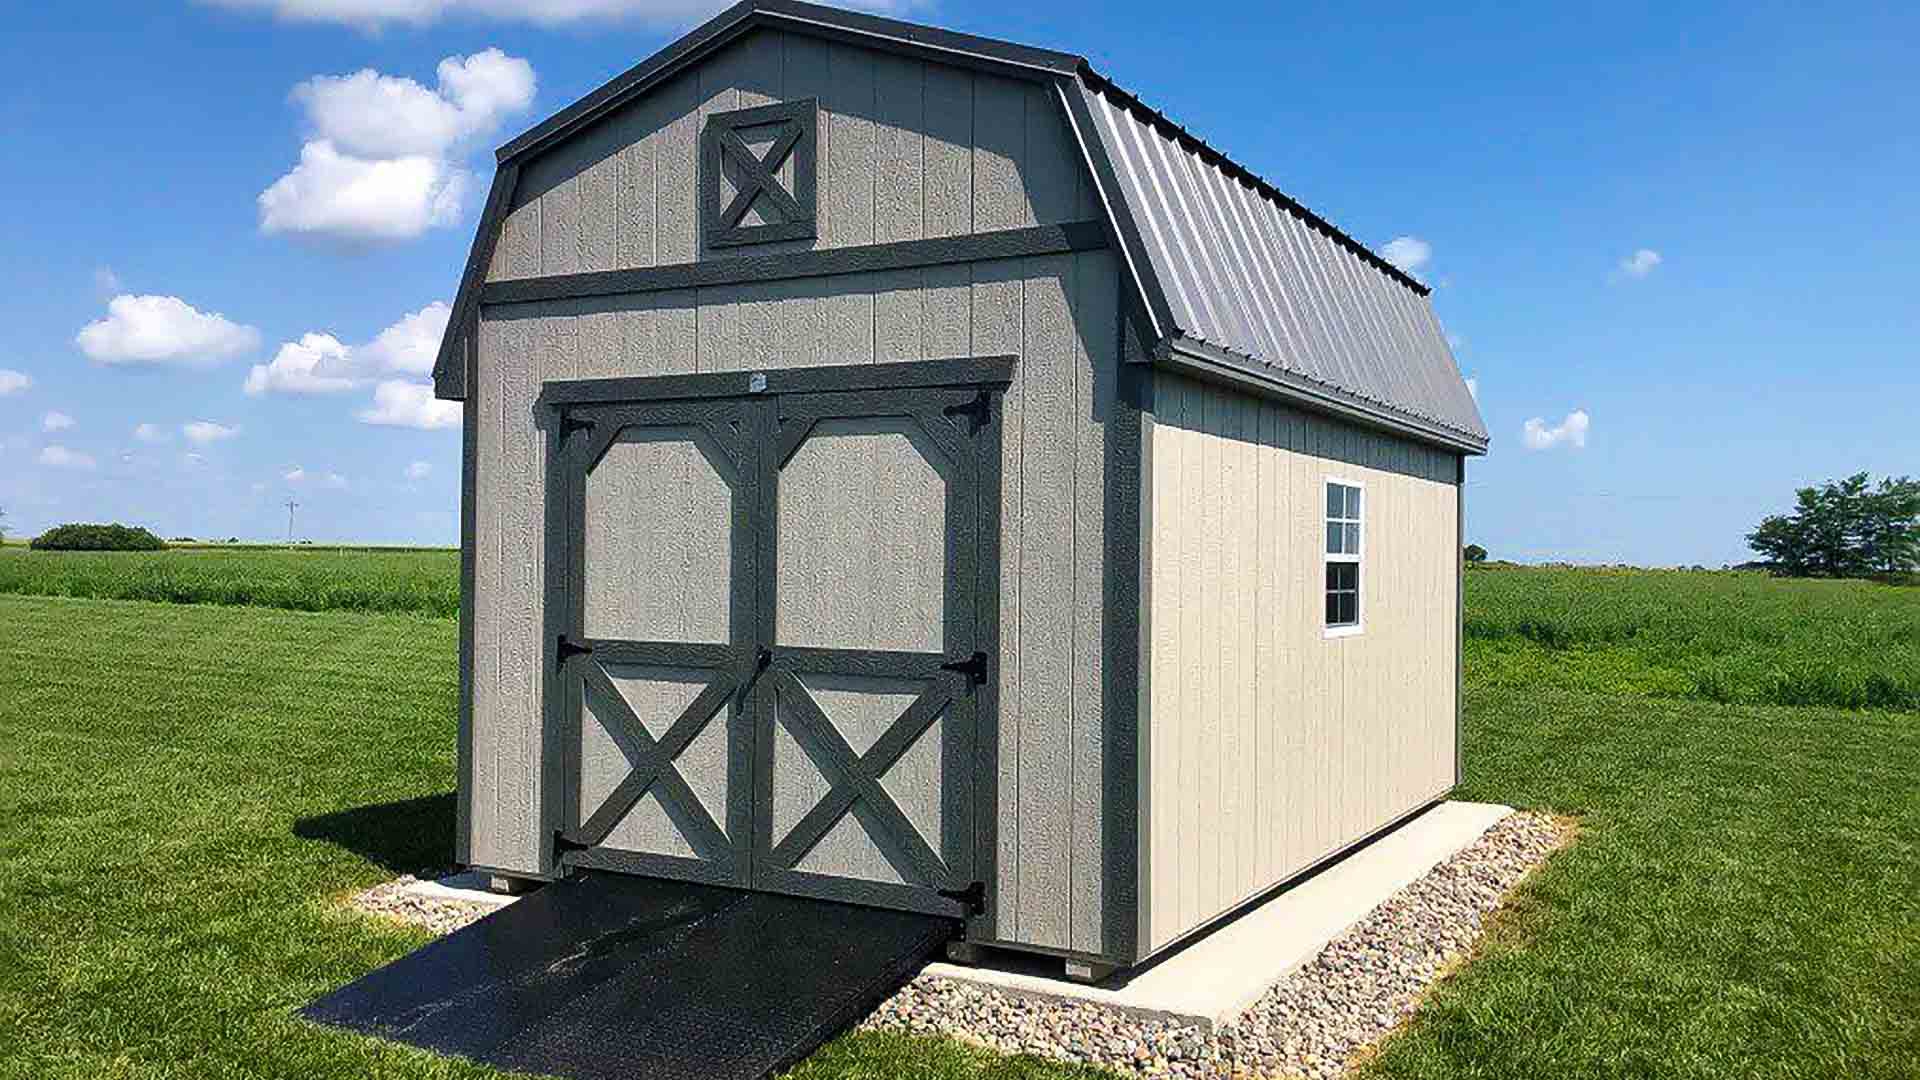 Sun Rise Sheds | Steel Or Aluminum: Which Shed Ramp Is The Best One For You?